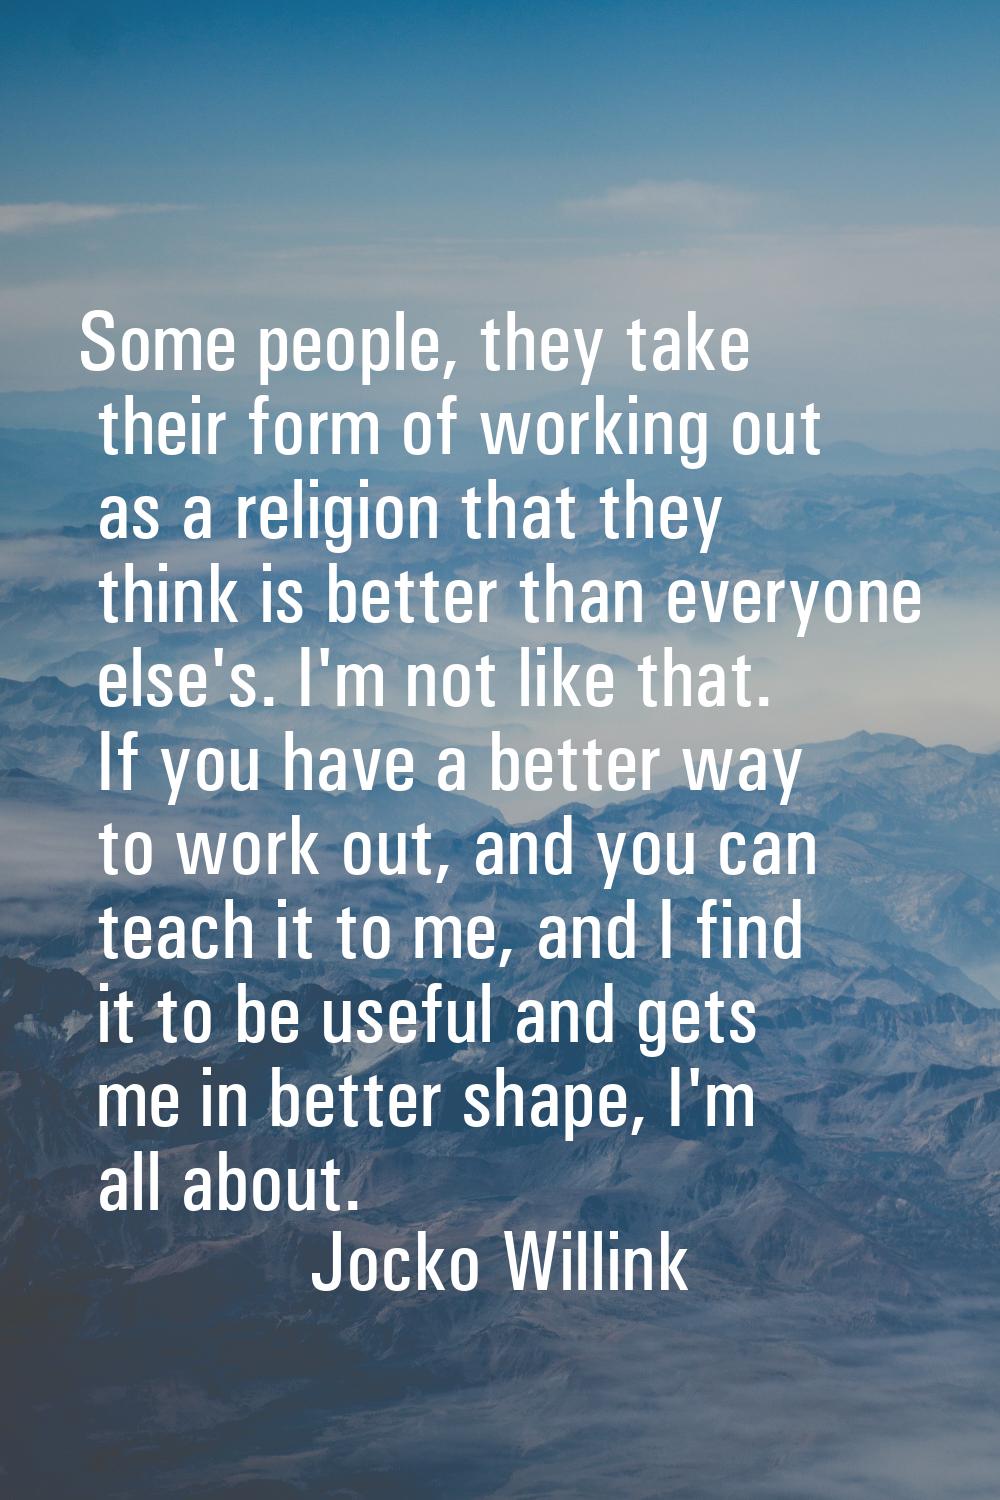 Some people, they take their form of working out as a religion that they think is better than every